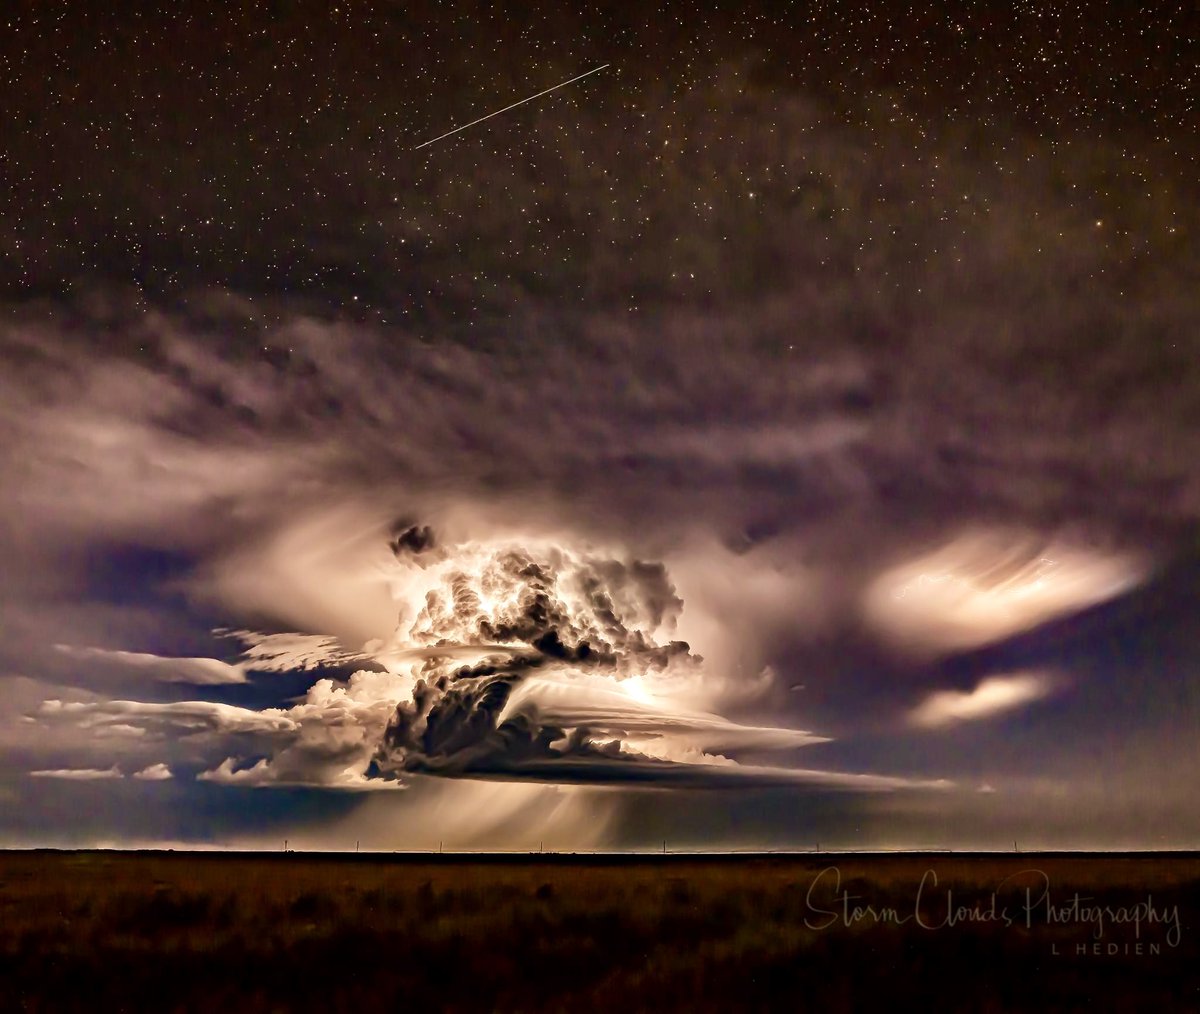 Last 2023 #stormchasing image!😢A #supercell 🌩️ #storm with #lightning and a #shootingstar ✨ near #Springfield #Colorado June 16.📷 #stormhour #wxtwitter @xwxclub #natgeoyourshot
#bestoftheUSA_weather @CloudAppSoc #nikonusa #zreators #nikonoutdoors @nikonoutdoorsusa @discovery